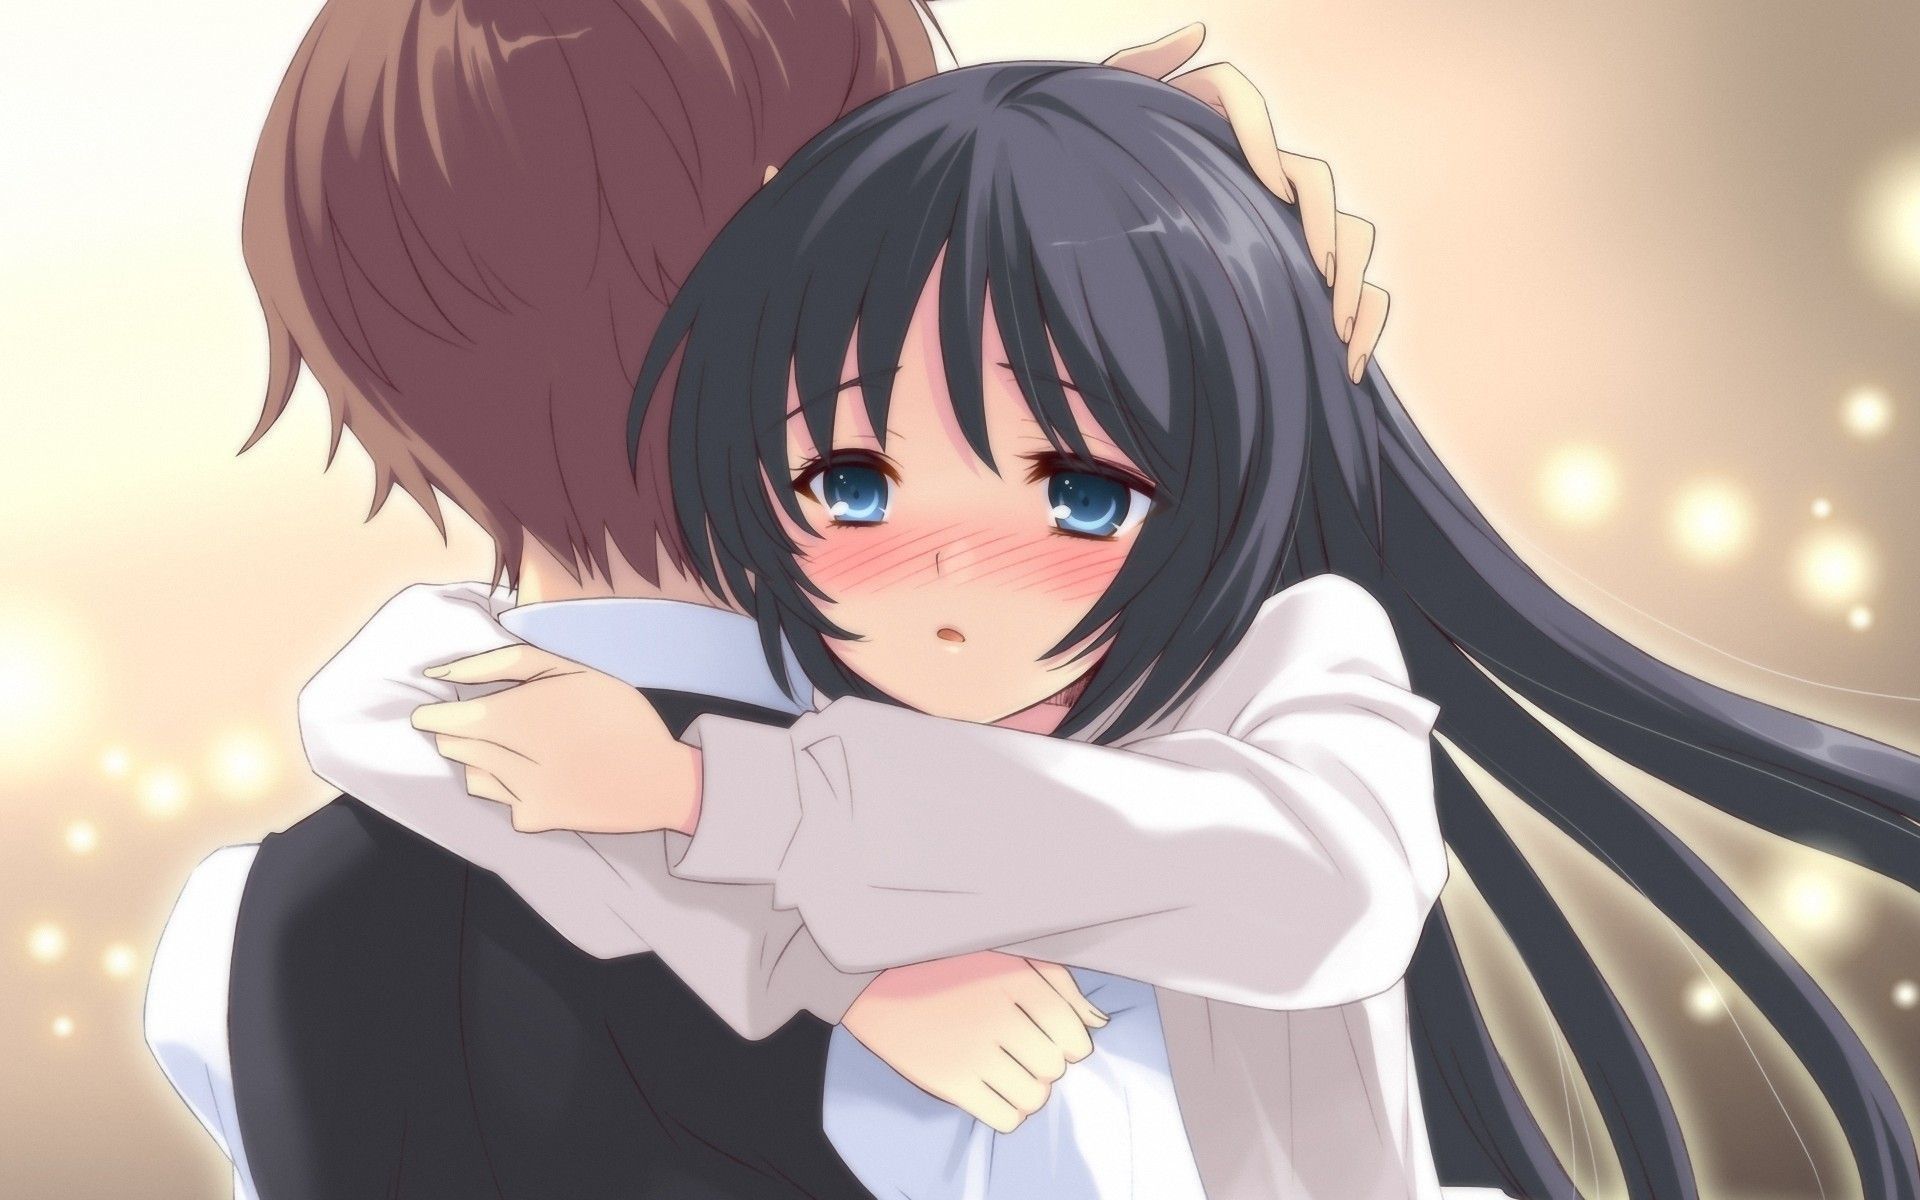 Anime Couple Hug Wallpapers posted by Ethan Walker